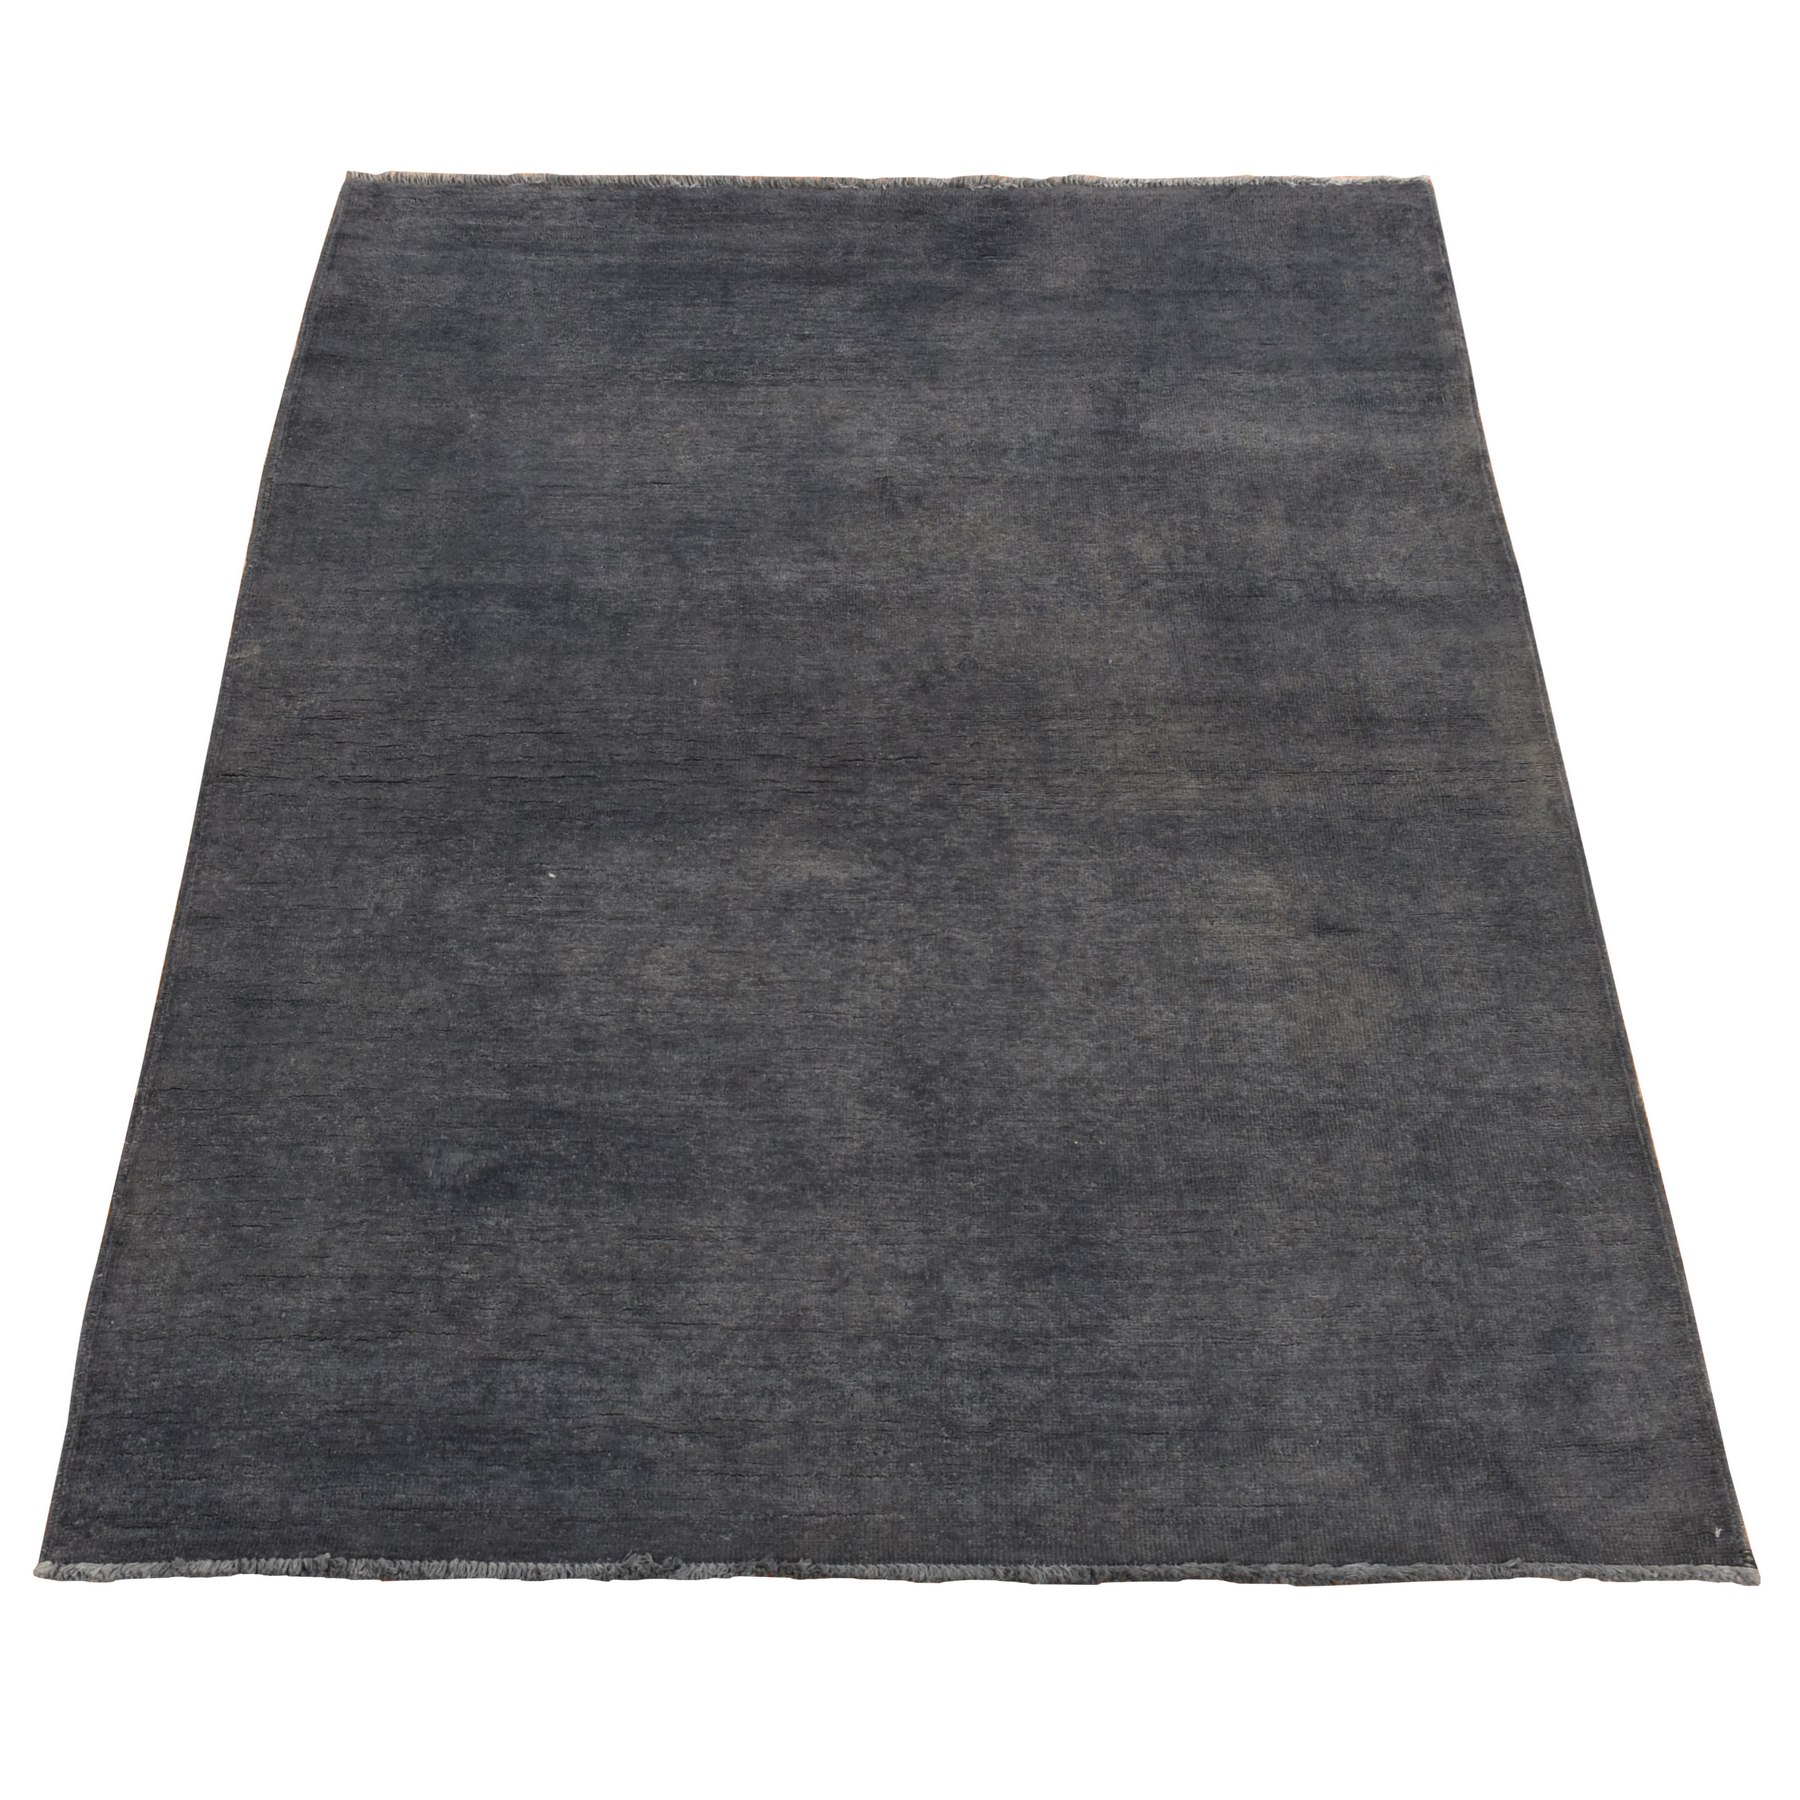 4'1"x5'10" Arsenic Gray, Overdyed Peshawar, Solid, Pure Wool, Hand Woven, Oriental Rug 